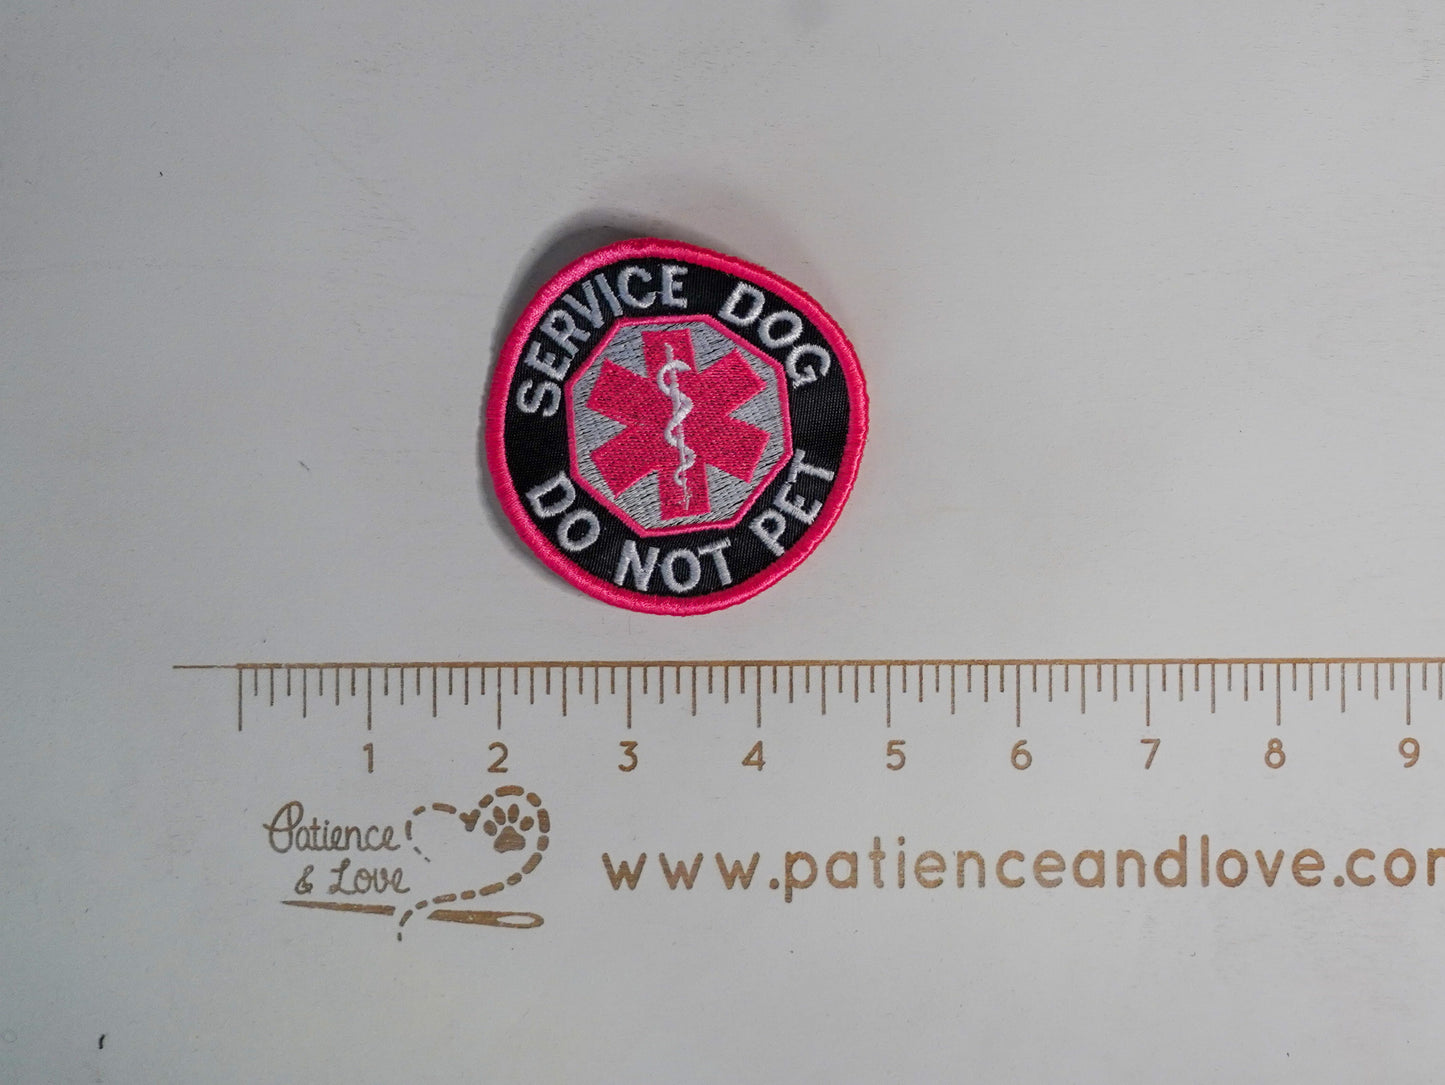 Premade/ Ready to ship patches -Service Dog, Do Not Pet, Medical symbol, 3 inch round patch